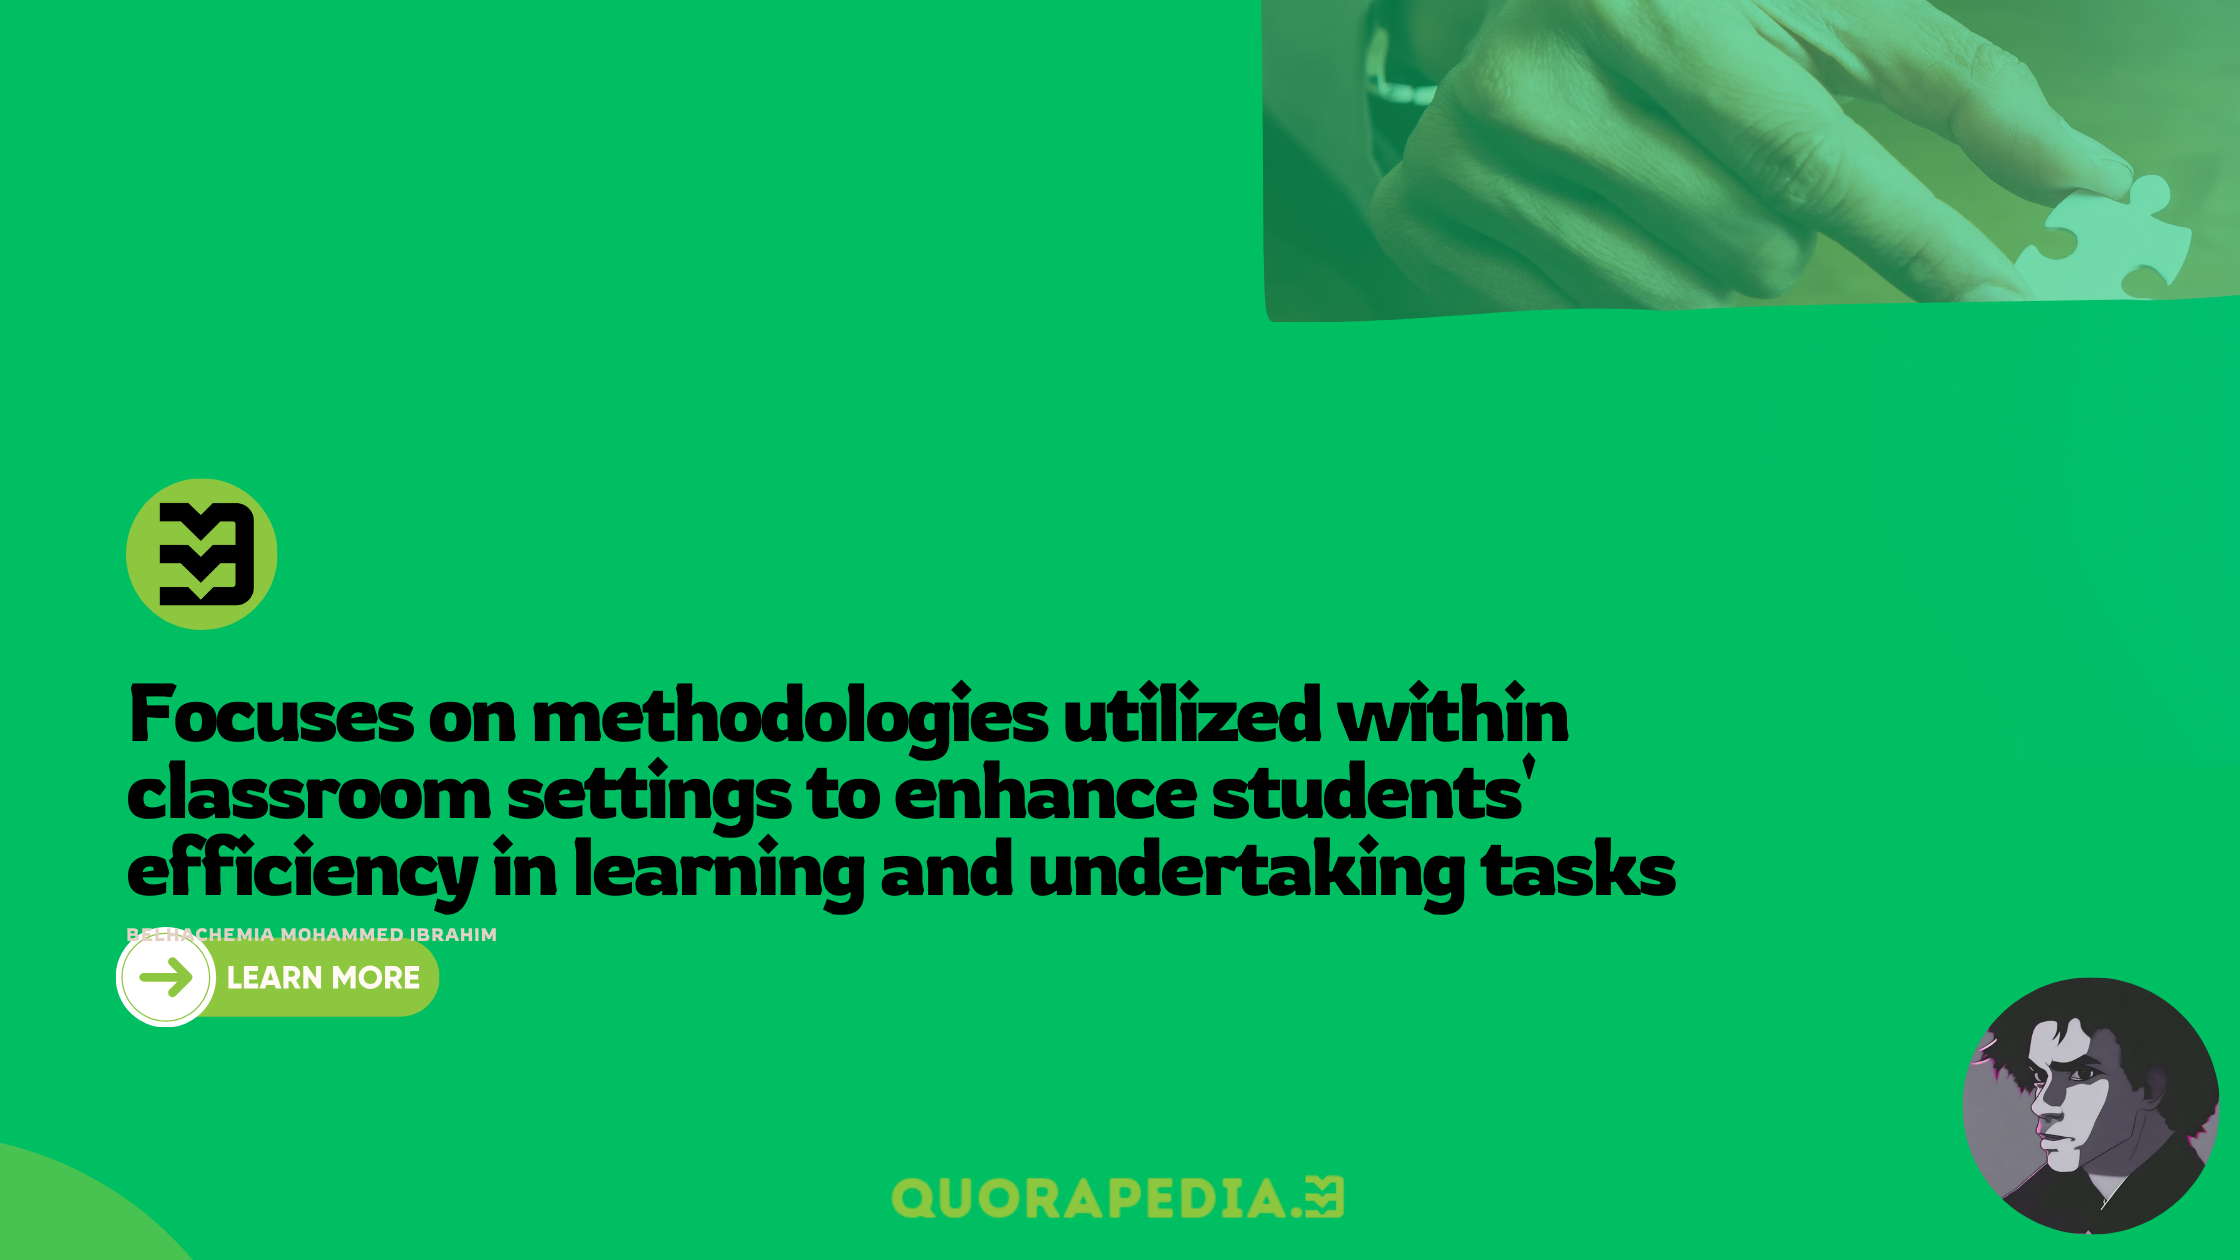 Focuses on methodologies utilized within classroom settings to enhance students' efficiency in learning and undertaking tasks